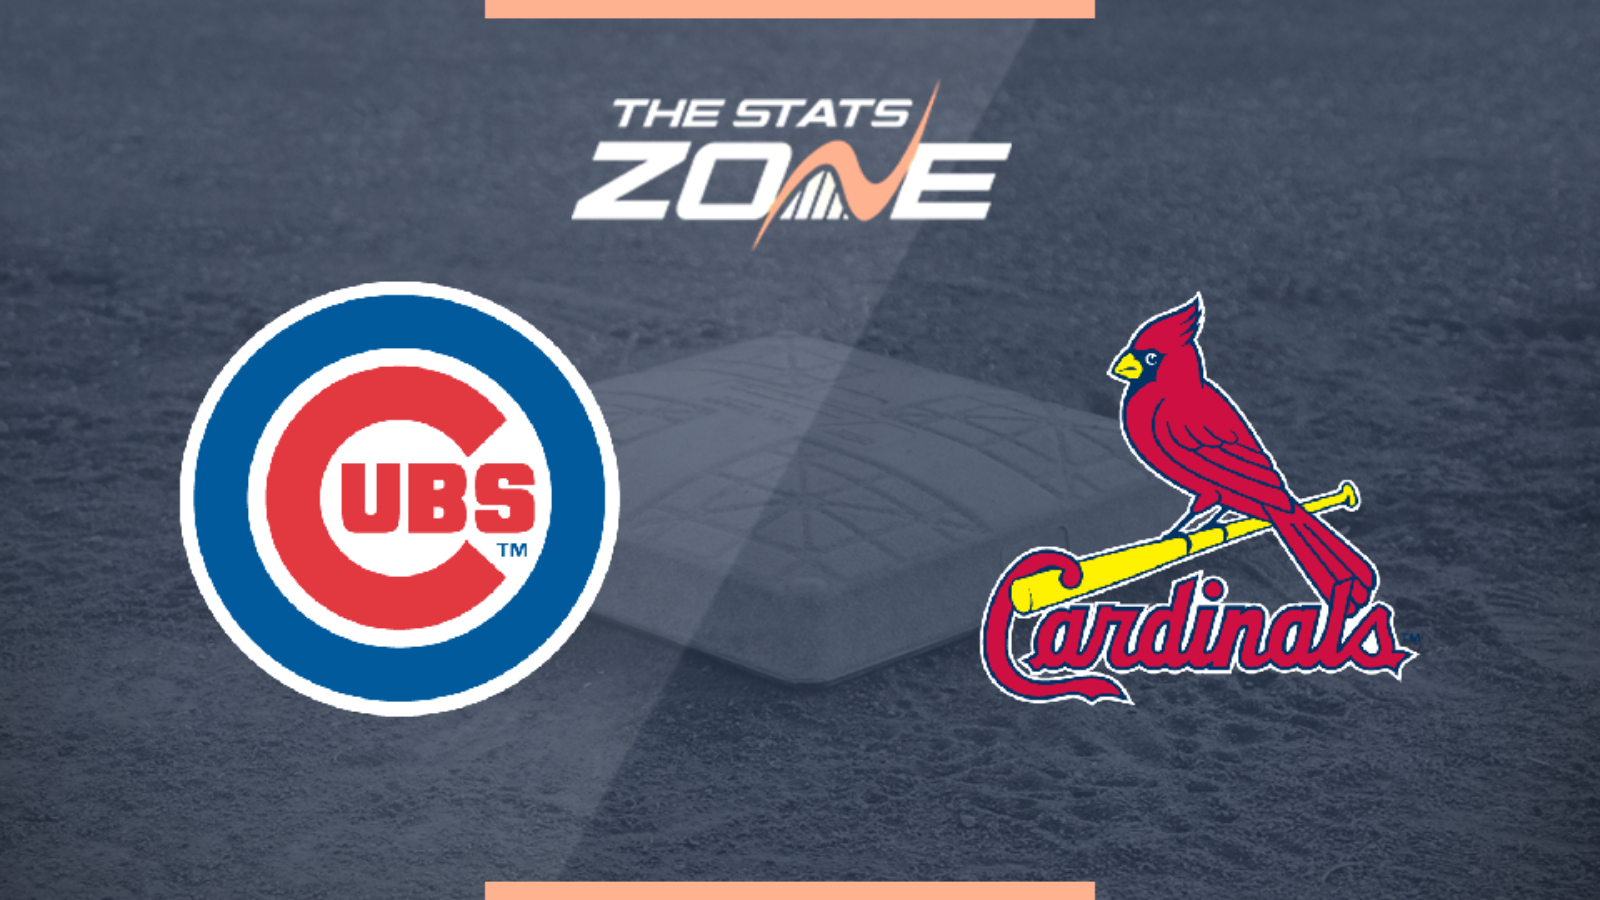 2019 MLB – Chicago Cubs @ St. Louis Cardinals Preview & Prediction - The Stats Zone